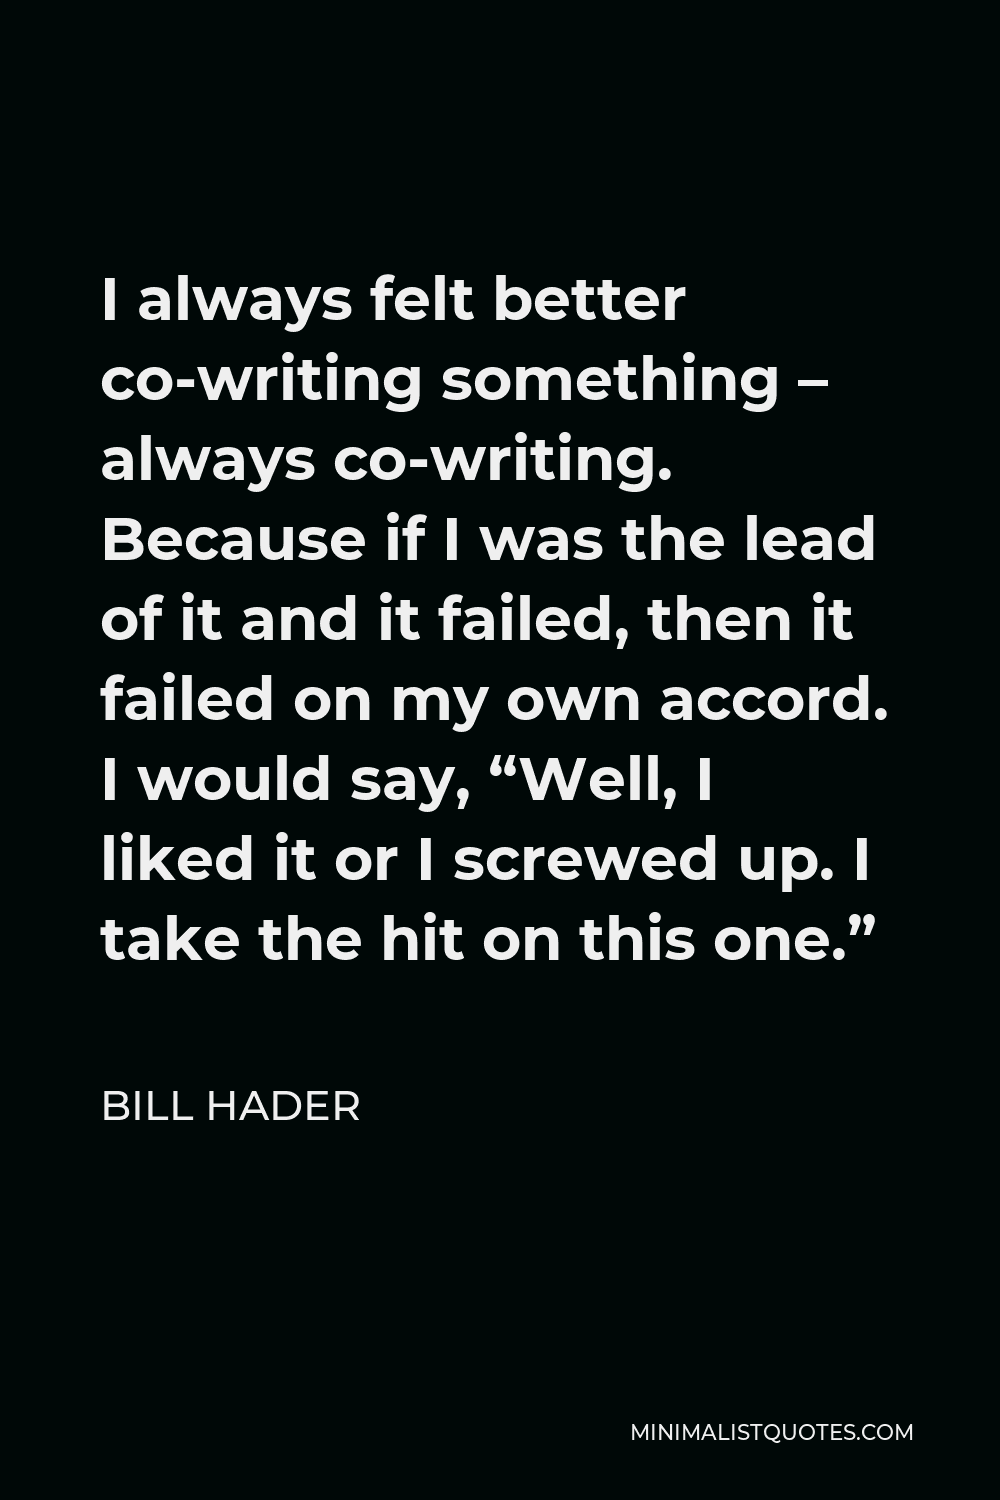 Bill Hader Quote - I always felt better co-writing something – always co-writing. Because if I was the lead of it and it failed, then it failed on my own accord. I would say, “Well, I liked it or I screwed up. I take the hit on this one.”